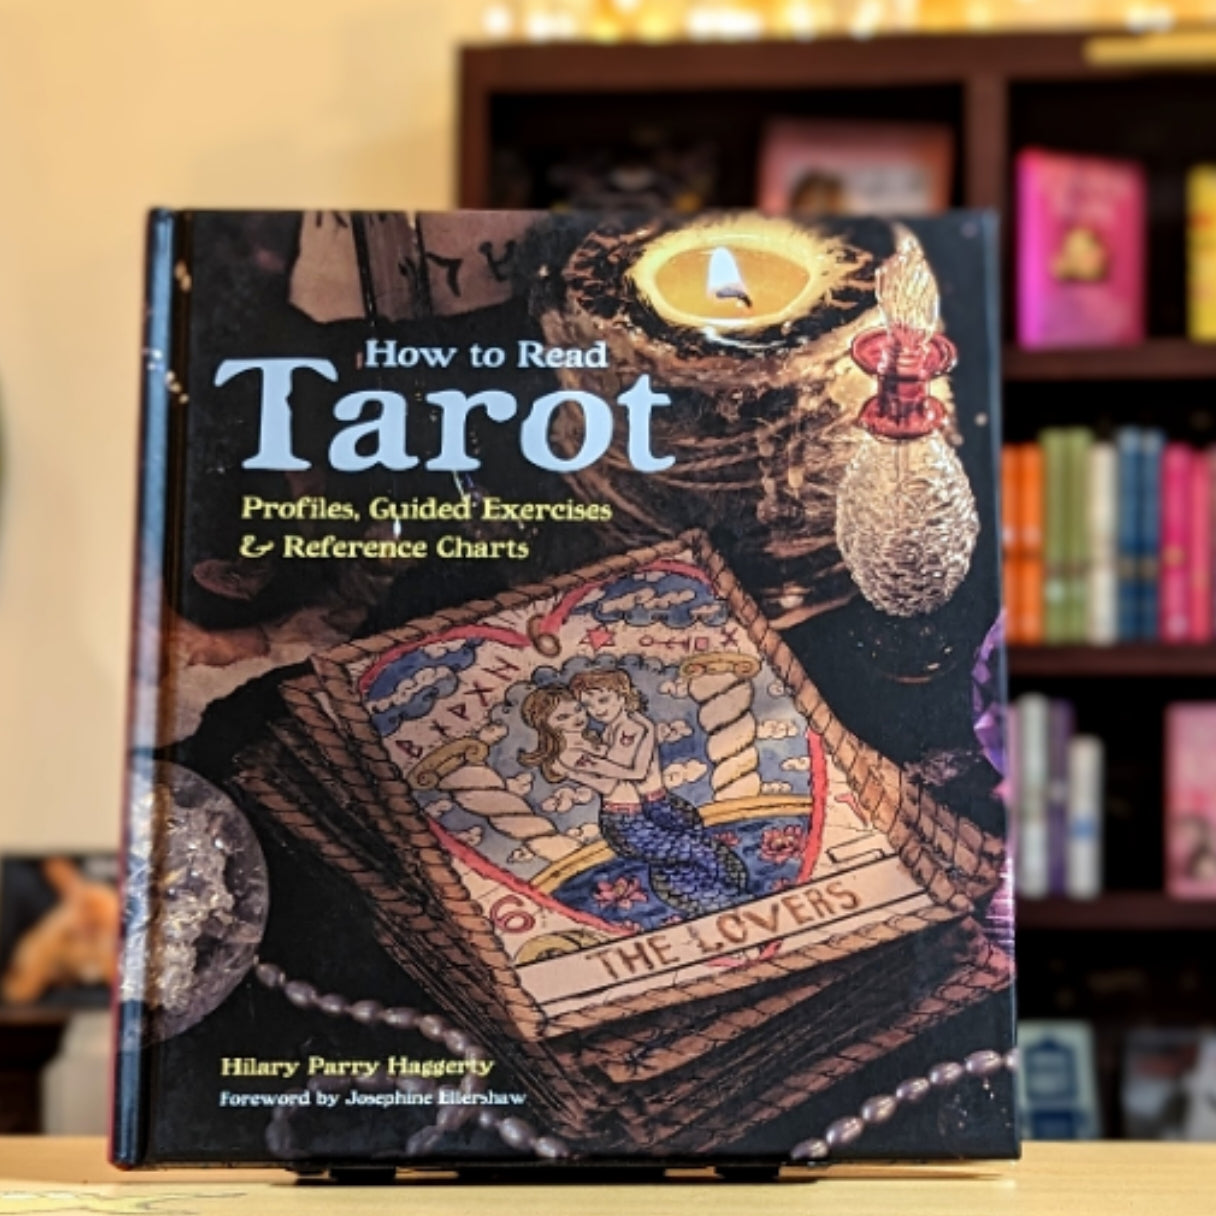 How to Read Tarot (Gothic Dreams)